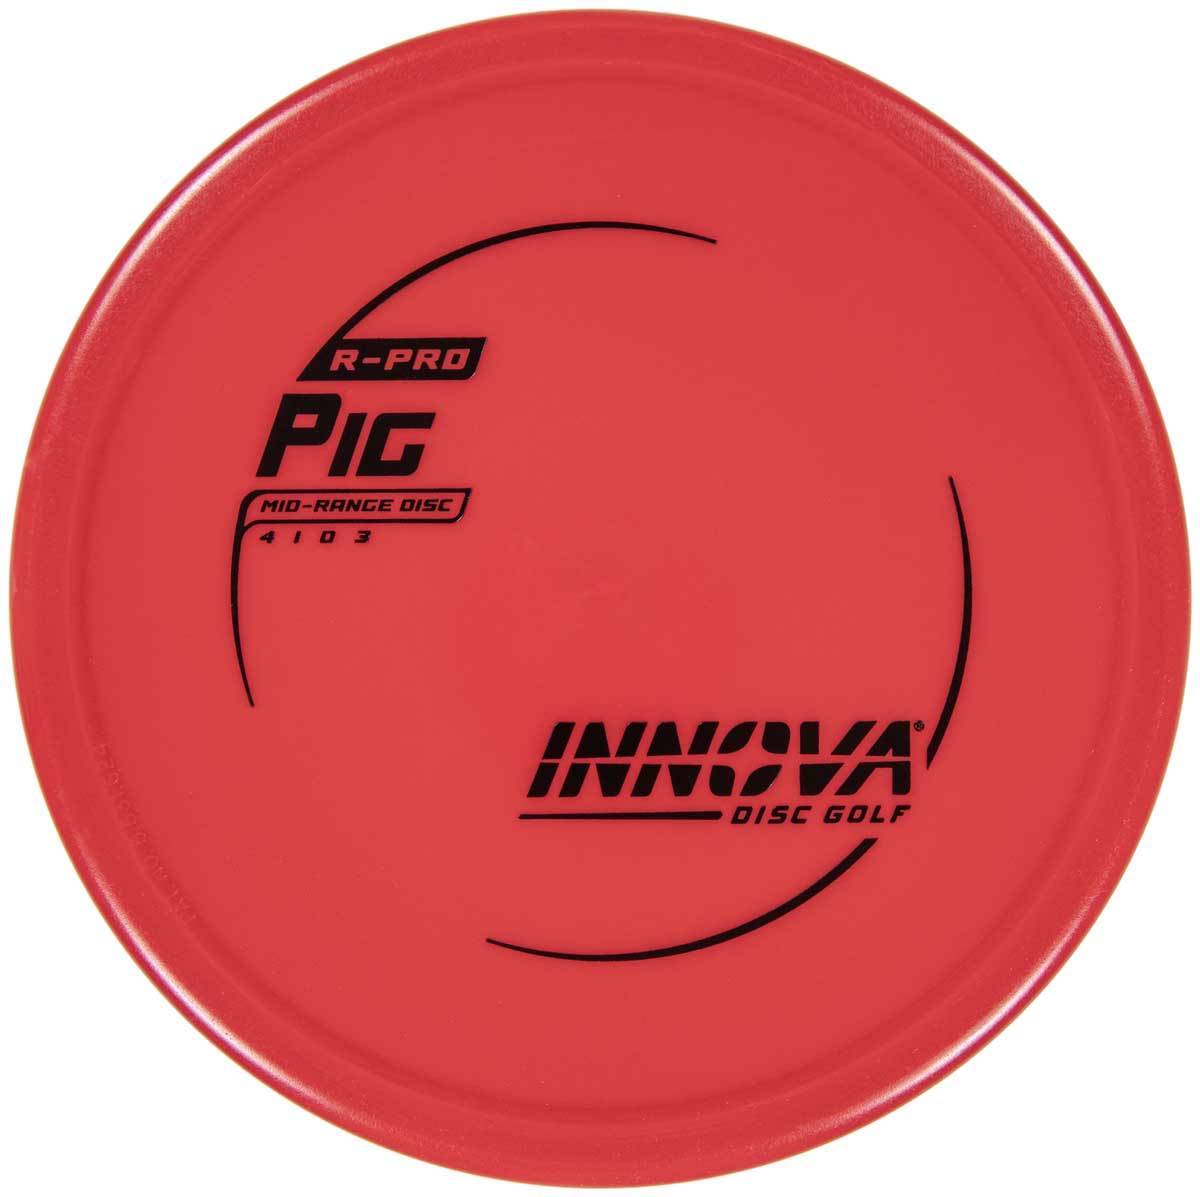 R-Pro Pig from Disc Golf United